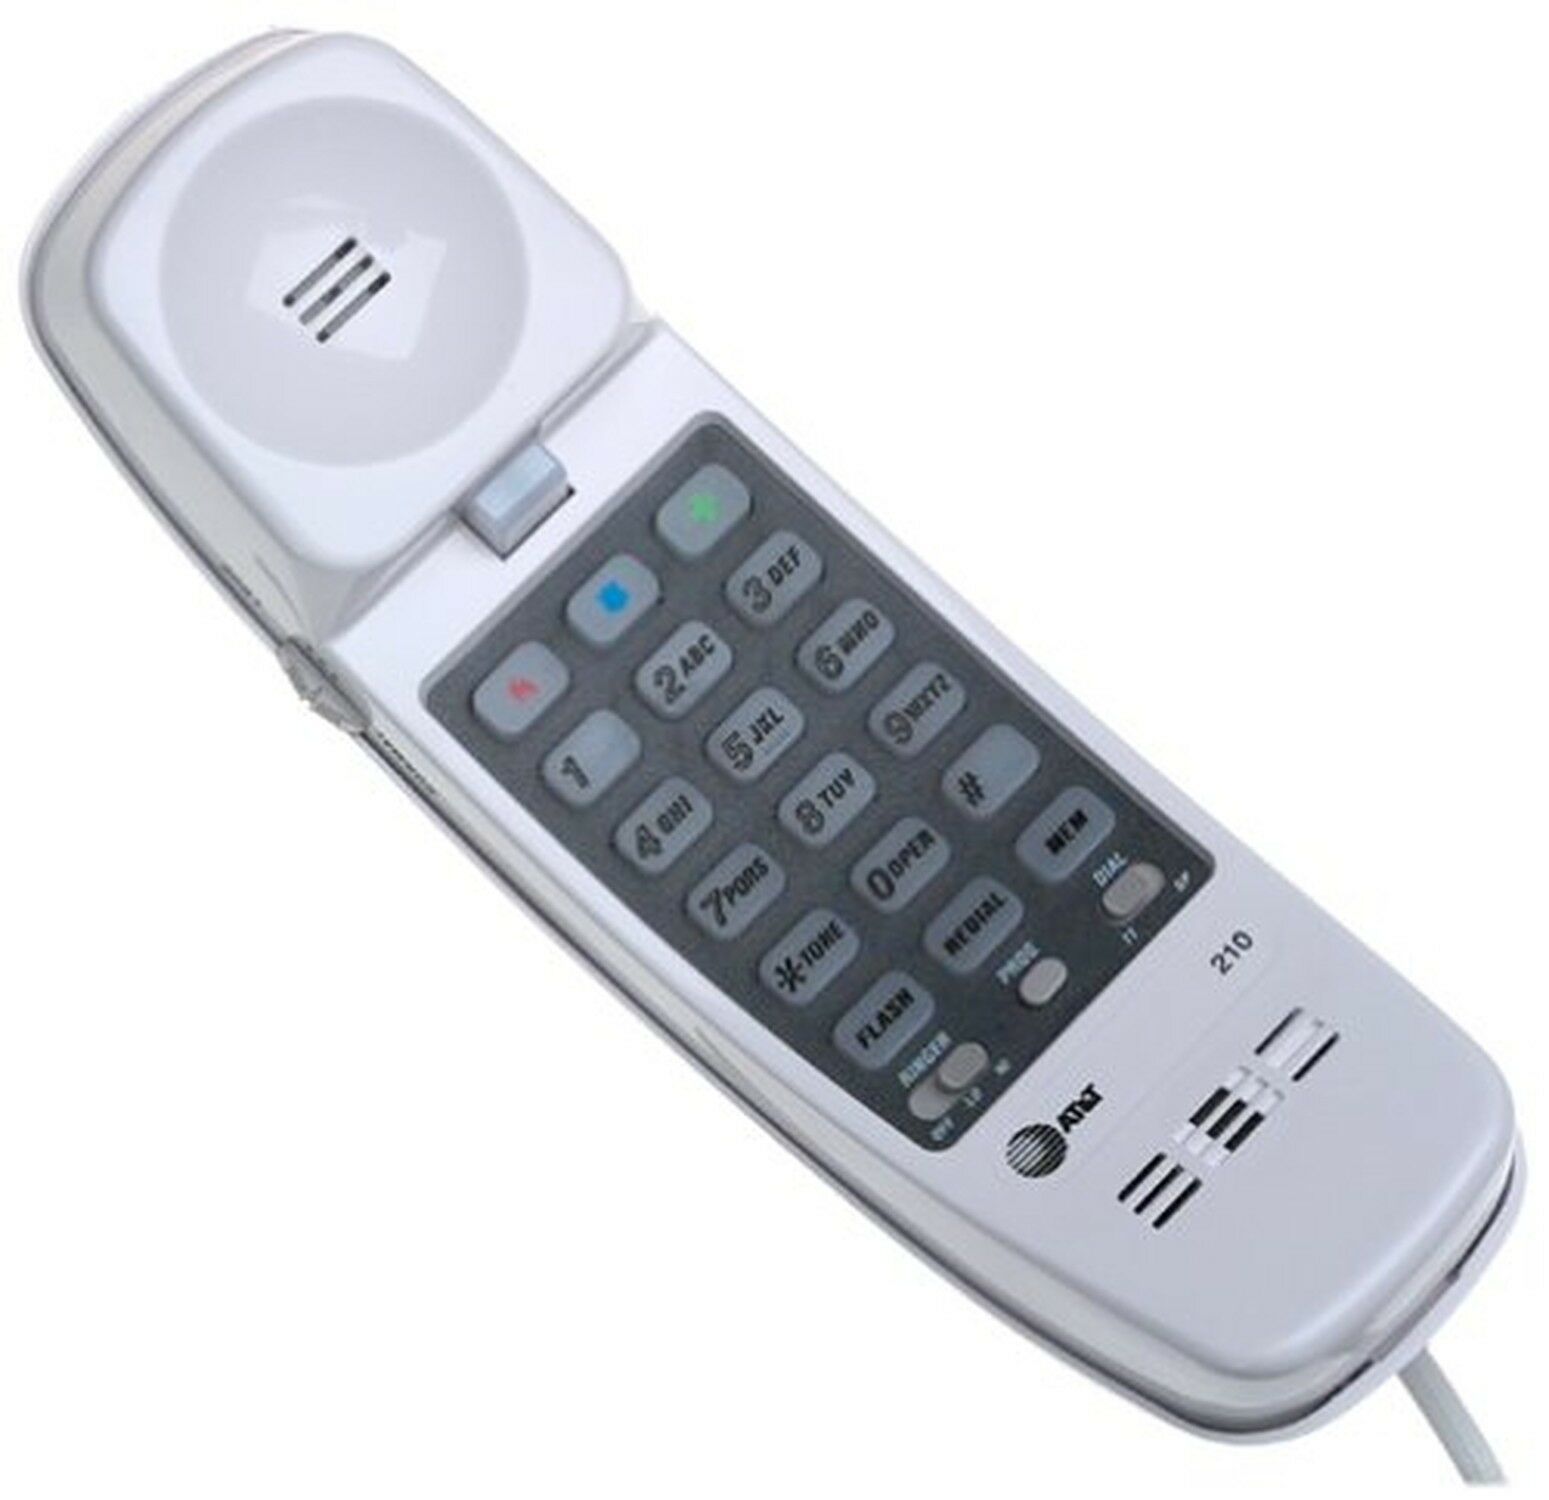 AT&T 210M Corded Phone Desk Wall Mount Trimline Telephone Handset White New - image 3 of 3